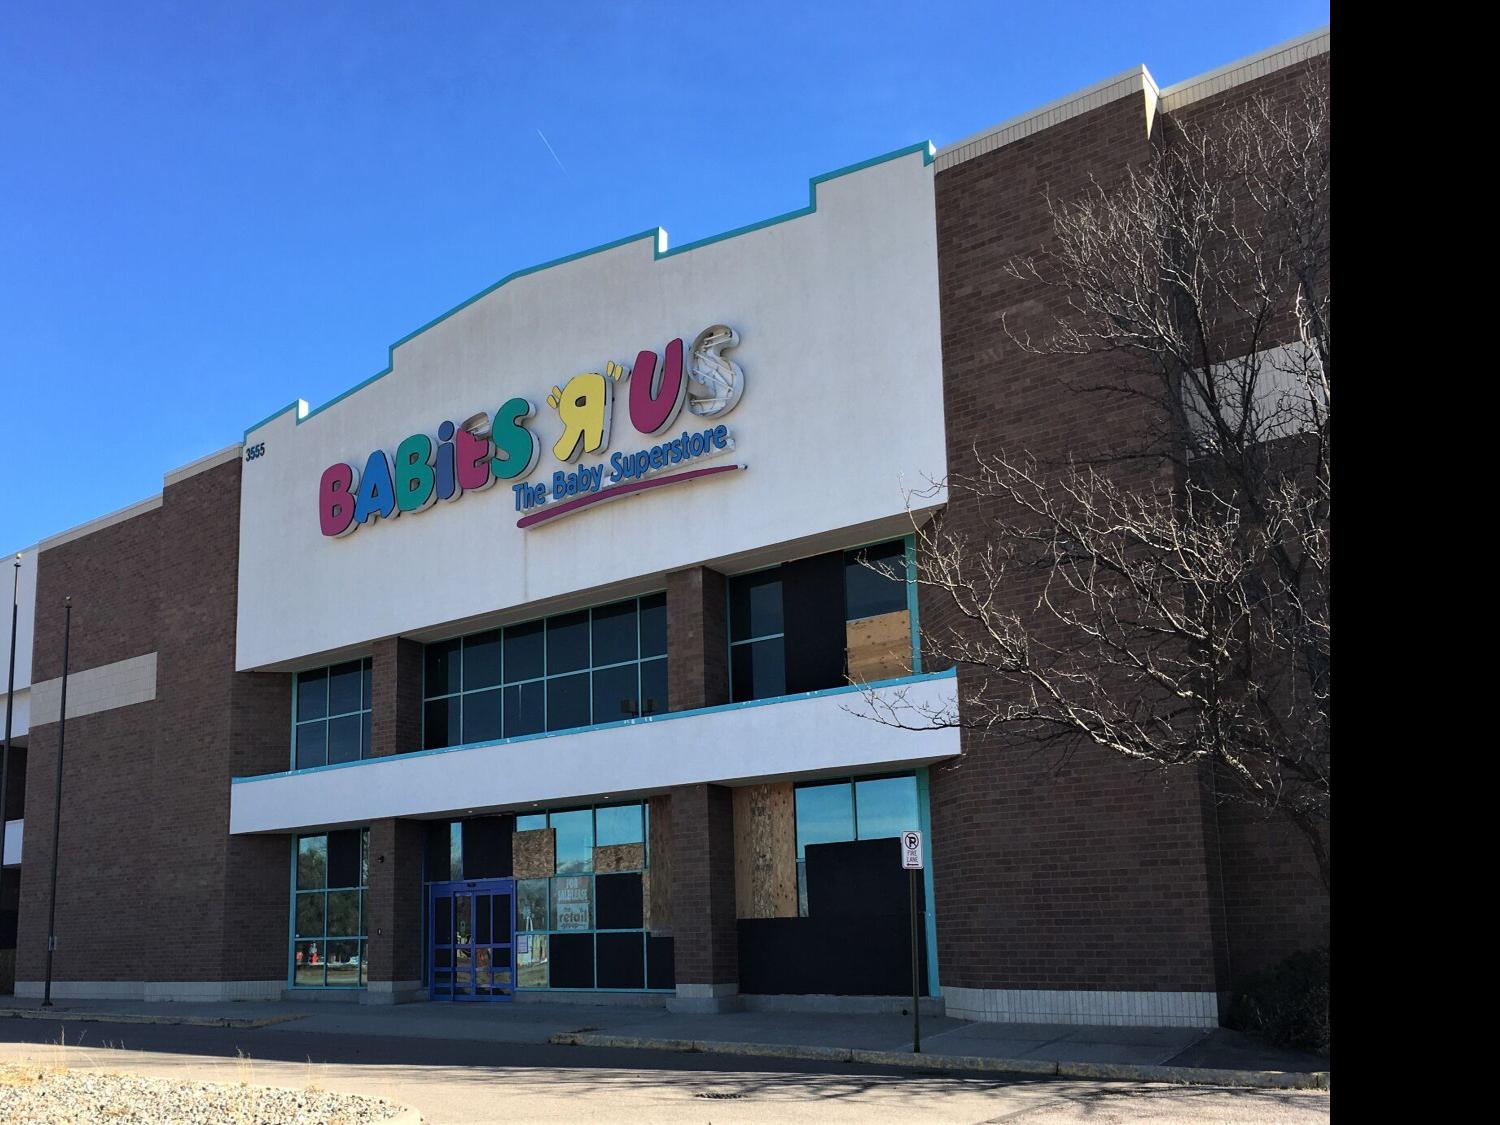 What's next for these empty retail buildings in Colorado Springs